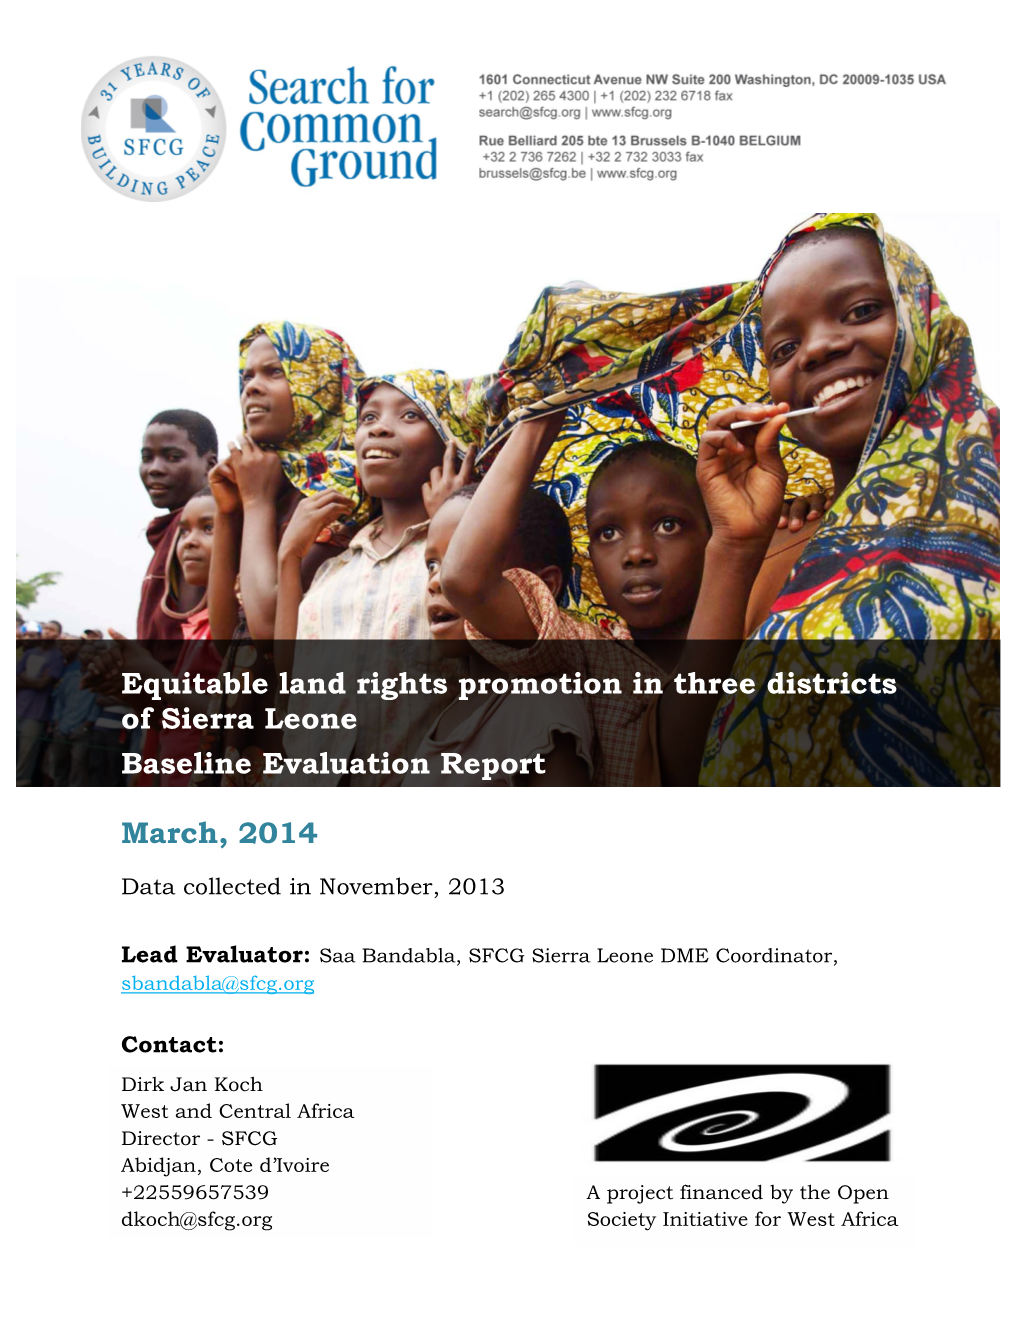 Equitable Land Rights Promotion in Three Districts of Sierra Leone Baseline Evaluation Report